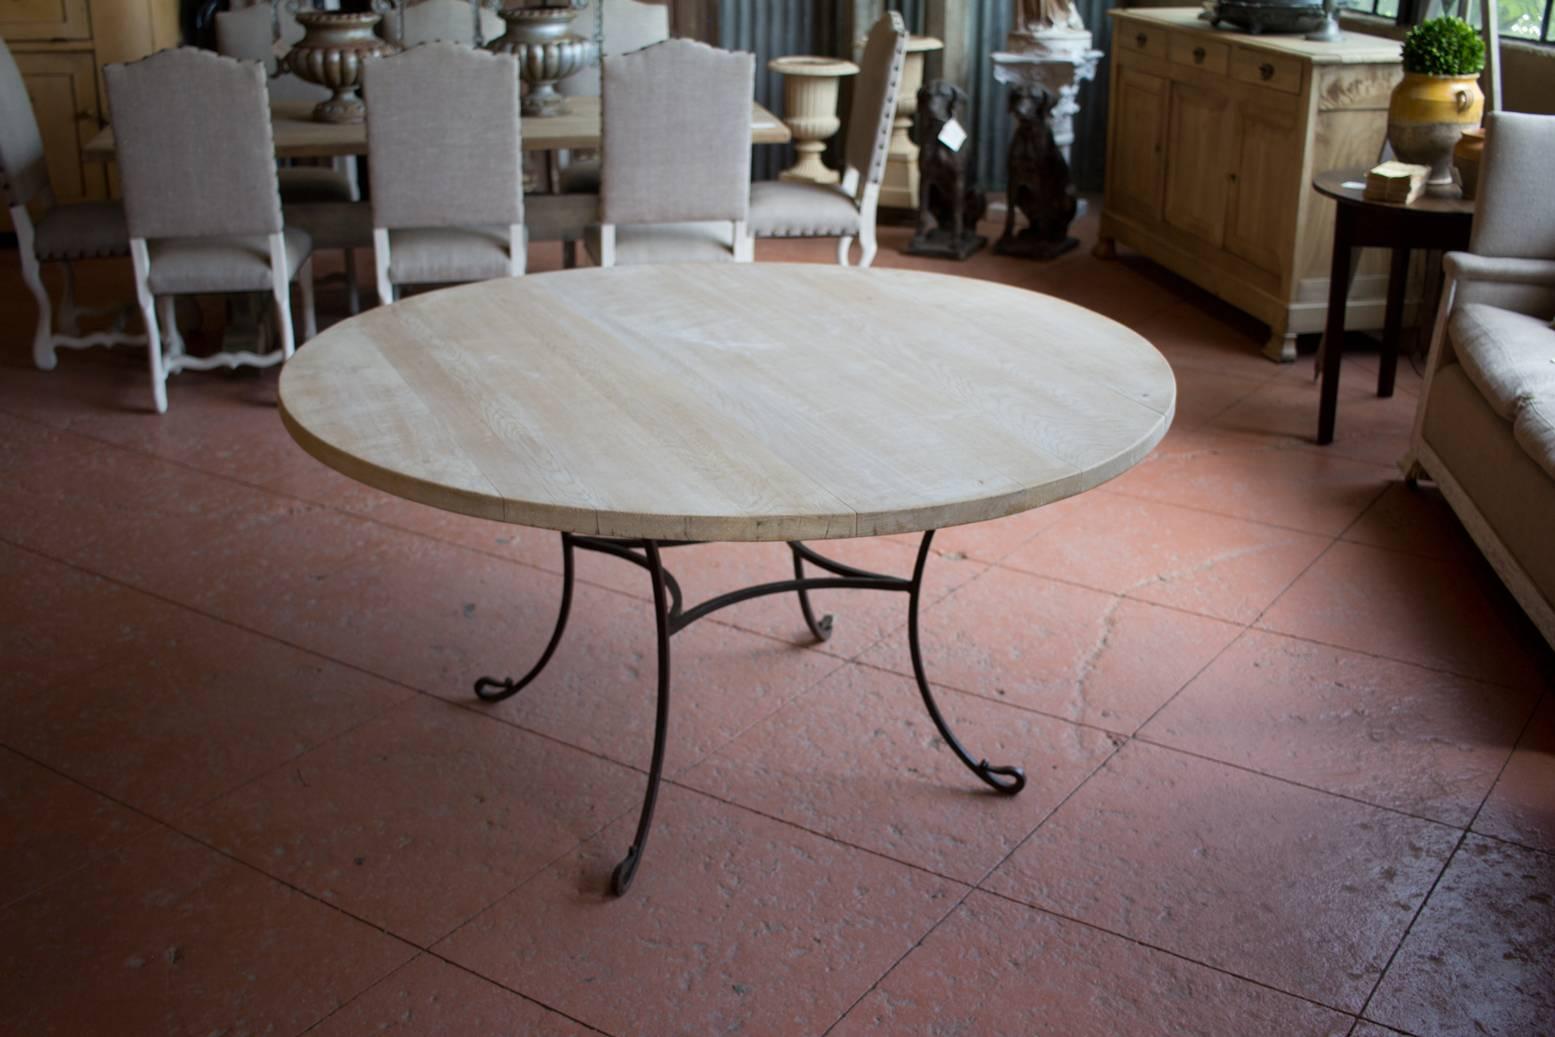 Beautiful quality Spanish hand forged wrought iron table base with large round bleached oak table top. Seats six nicely.